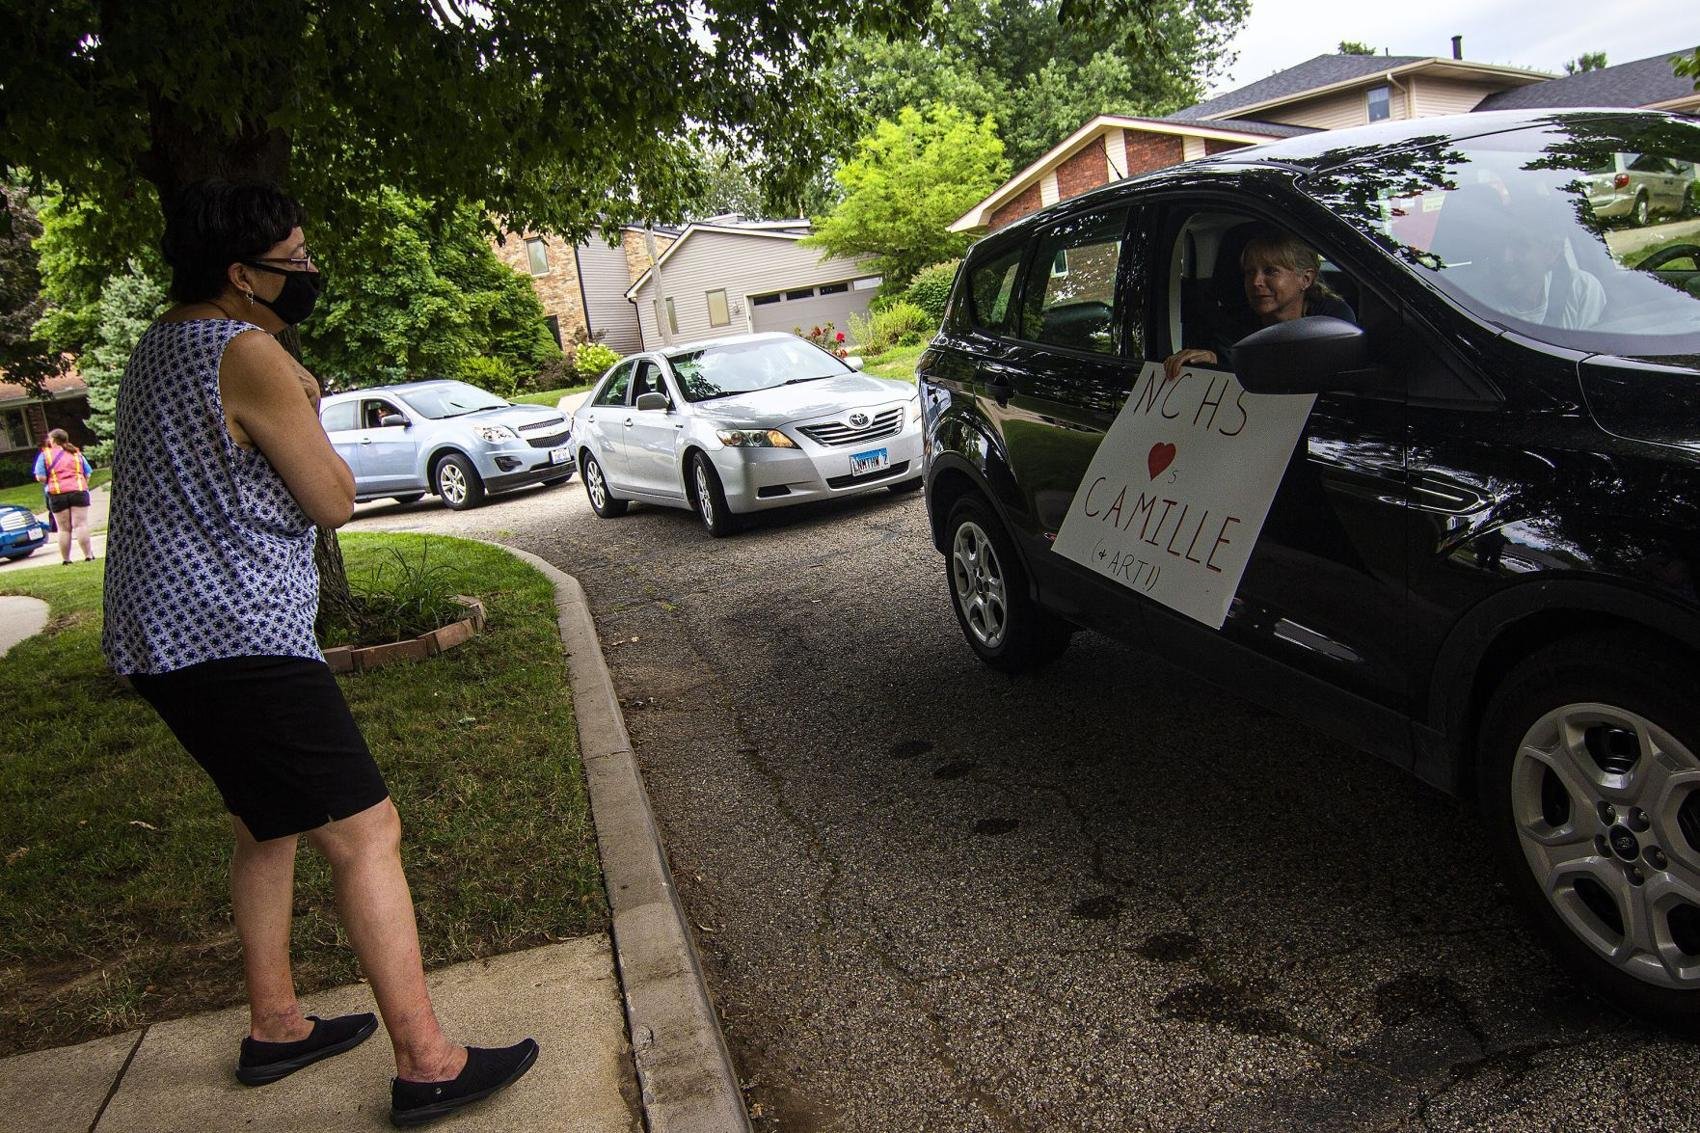  Camille Taylor, left, greets a passerby Friday, July 31, 2020, outside her home in Bloomington, Illinois. Earlier in the month, Camille and her husband, Art Taylor, were the targets of a disagreement in their neighborhood, so friends and colleagues 